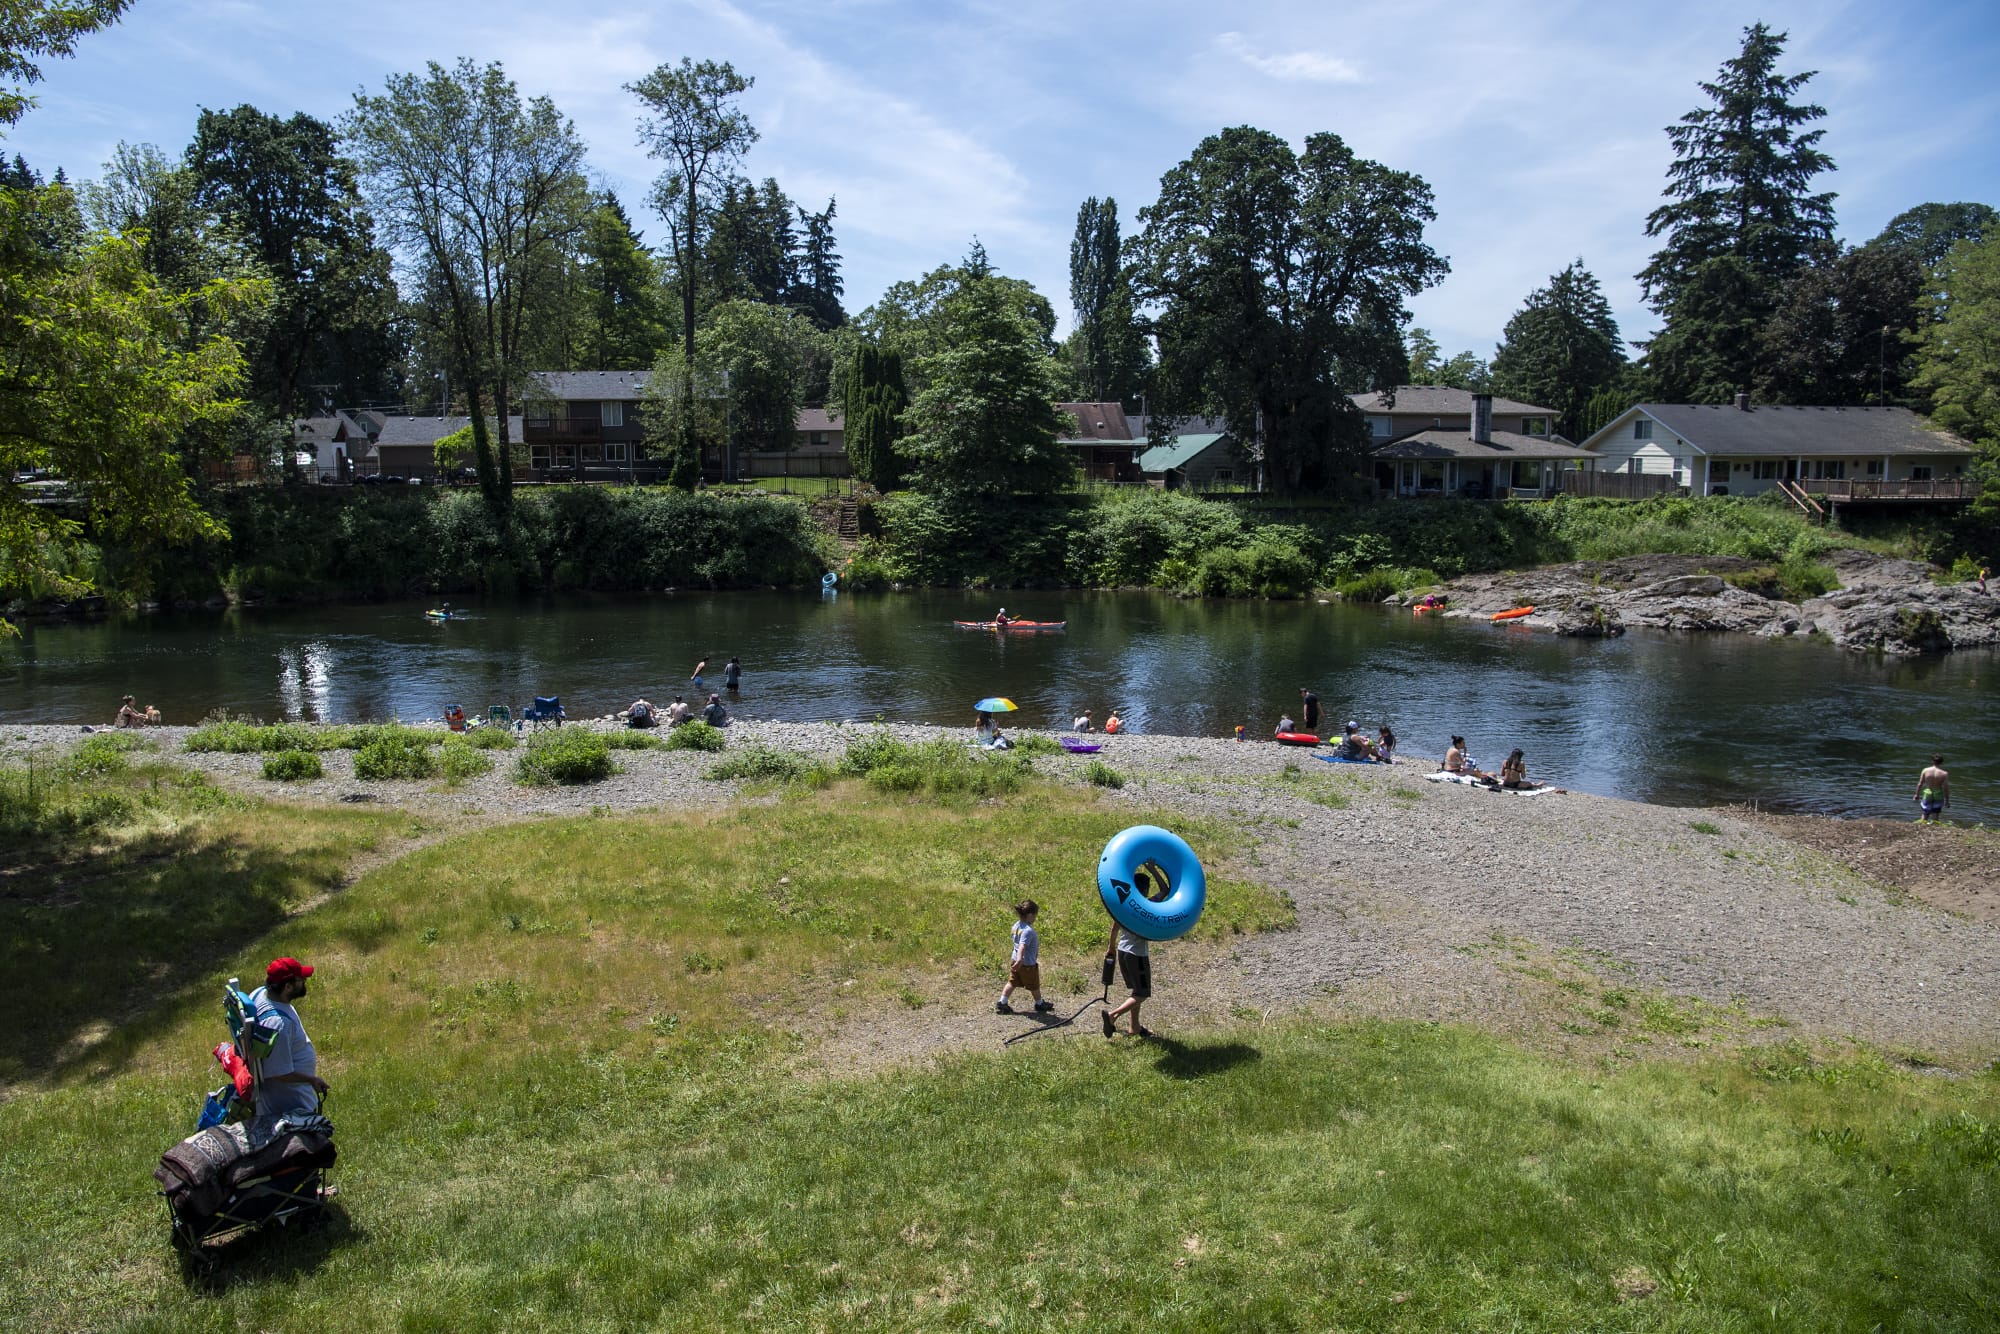 People line the beach on the first day of official reopening at Sandy Swimming Hole Park in Washougal on Friday. The park has been closed due to the COVID-19 public health emergency.